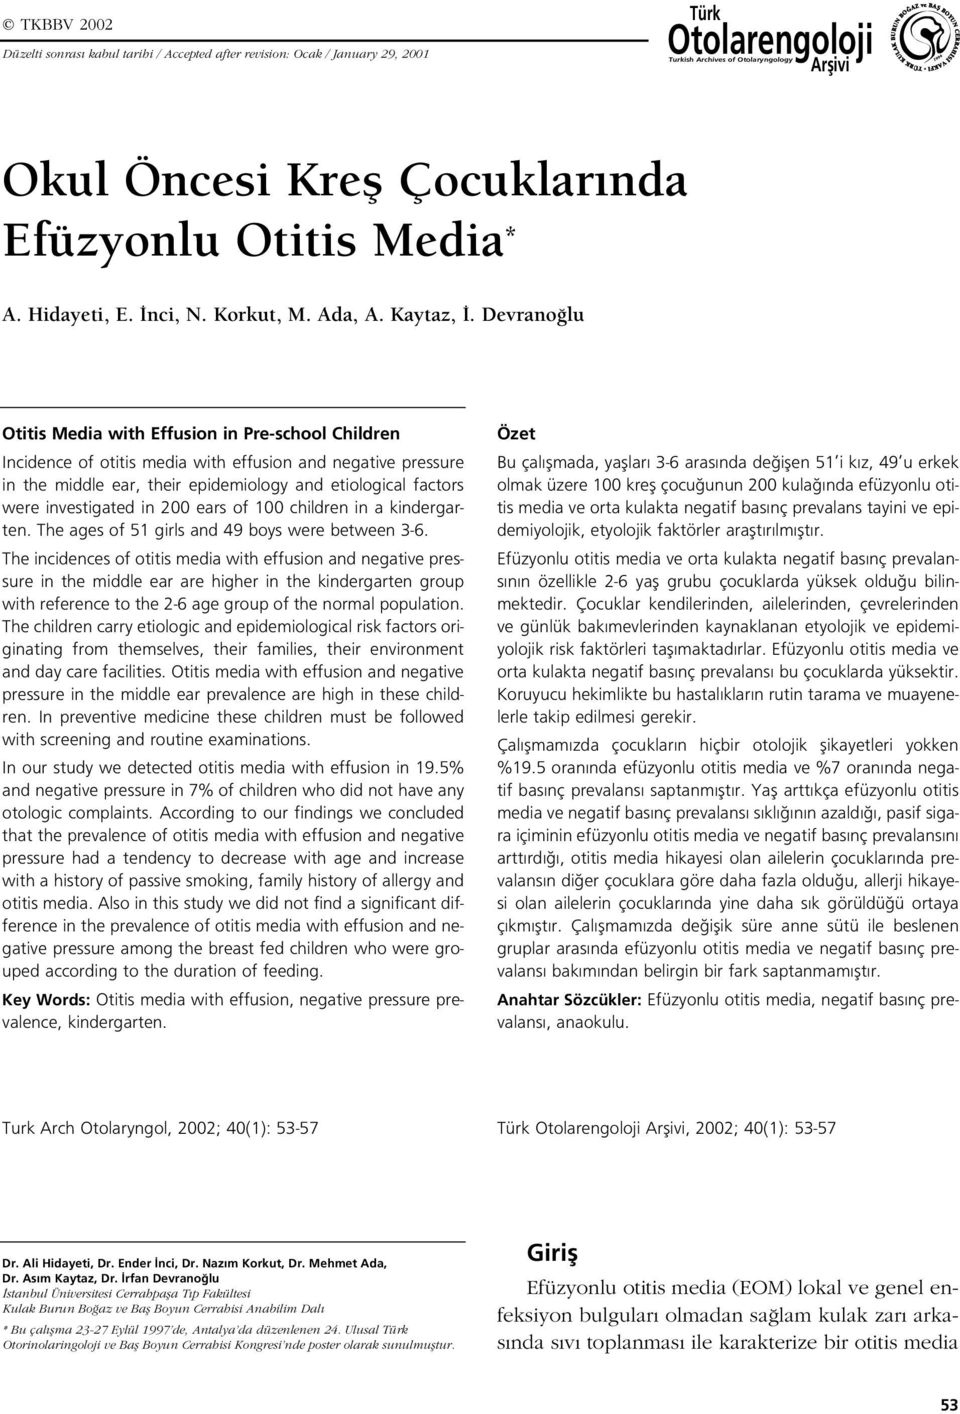 Devrano lu Otitis Media with Effusion in Pre-school Children Incidence of otitis media with effusion and negative pressure in the middle ear, their epidemiology and etiological factors were